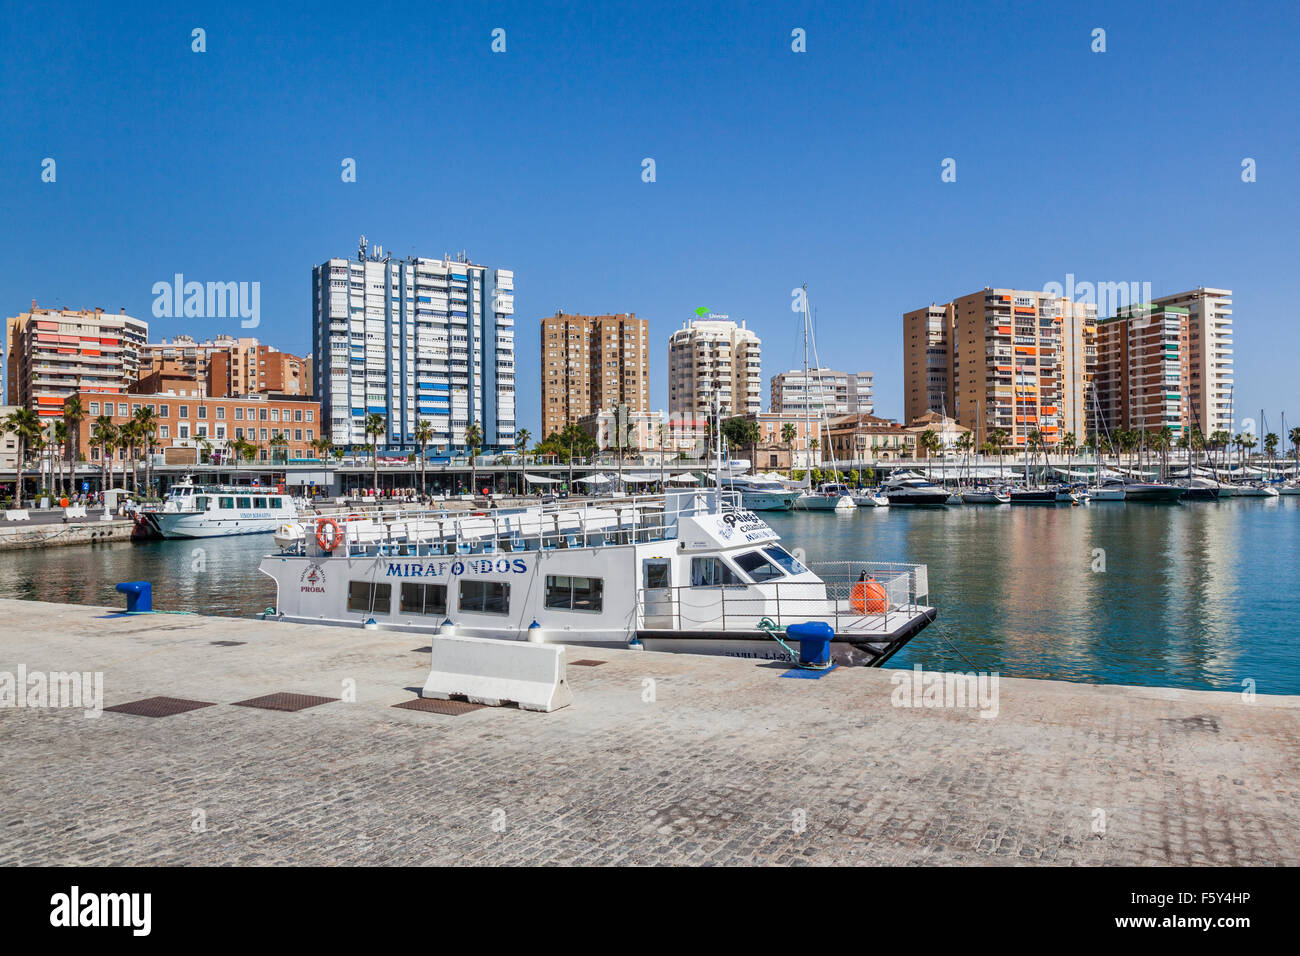 sightseeing tourboat at Muelle Dos, Port of Malaga, Costa del Sol, Andalusia, Spain Stock Photo